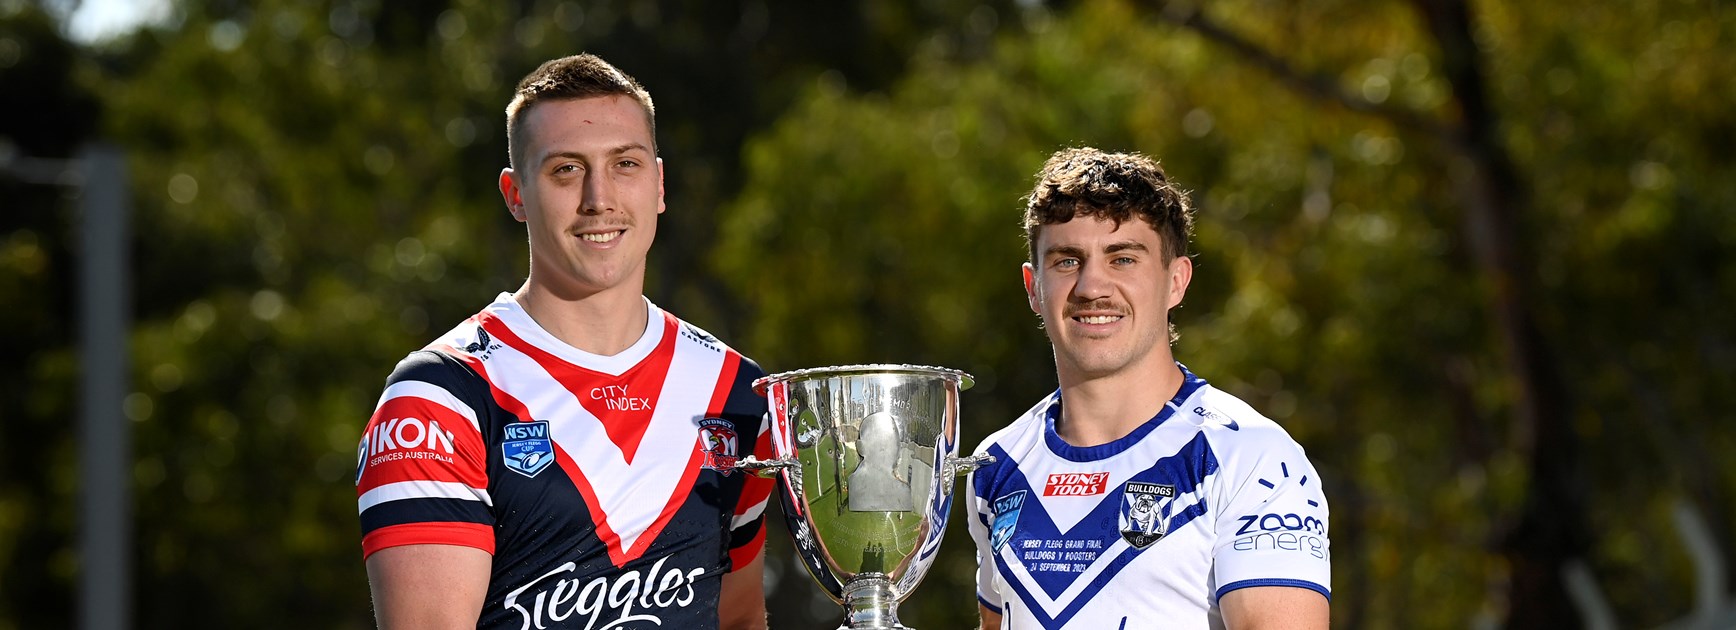 Bulldogs and Roosters each chasing historic win